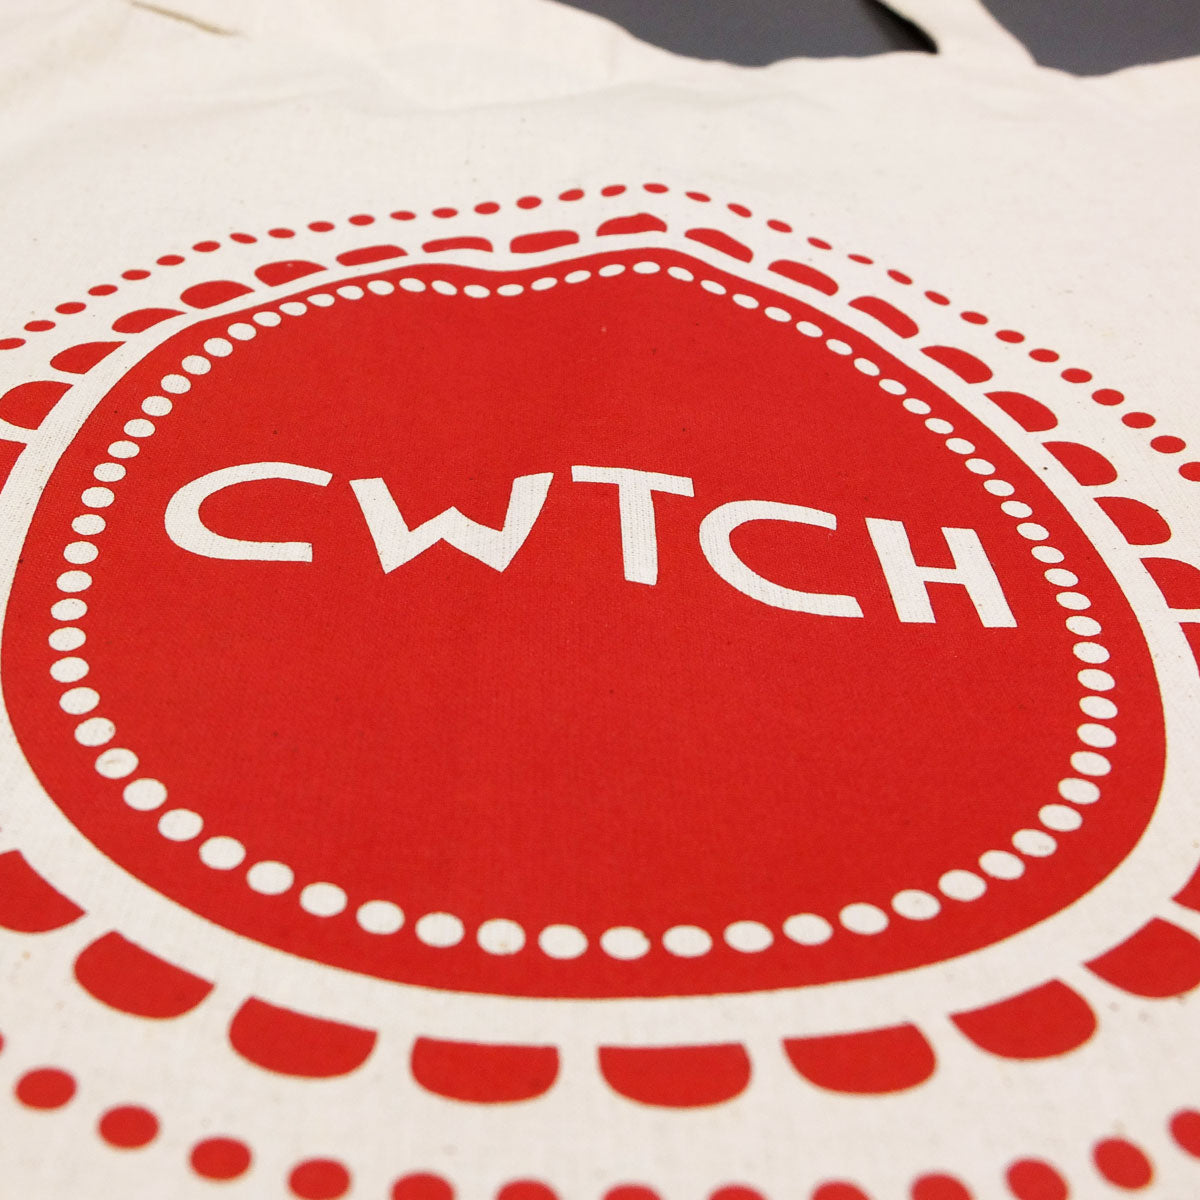 Cwtch in Dots Tote Bag